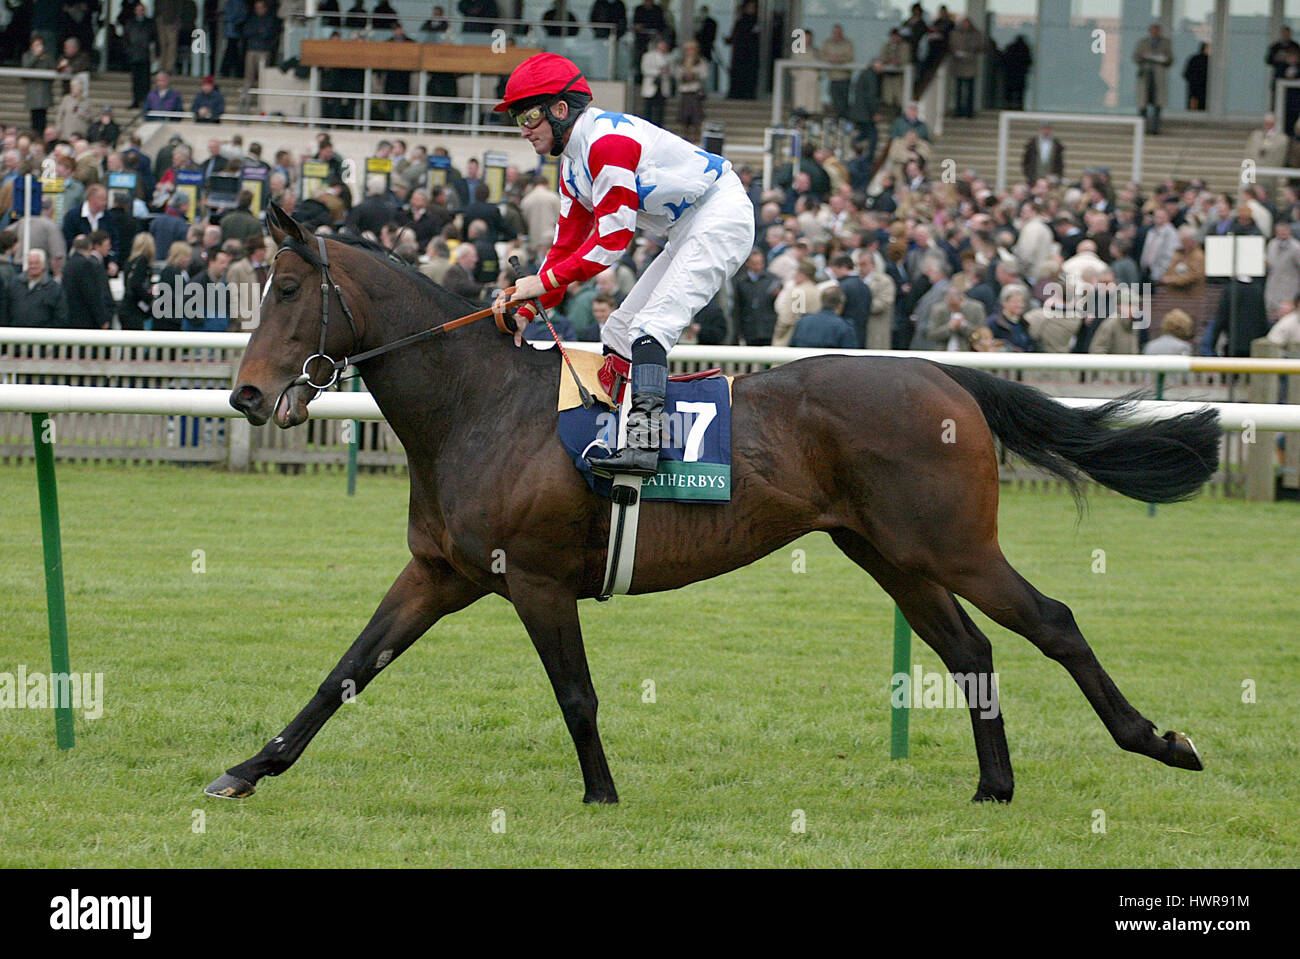 FORT DIGNITY RIDDEN BY M.J.KINANE NEWMARKET NEWMARKET RACECOURSE 13 April 2005 Stock Photo